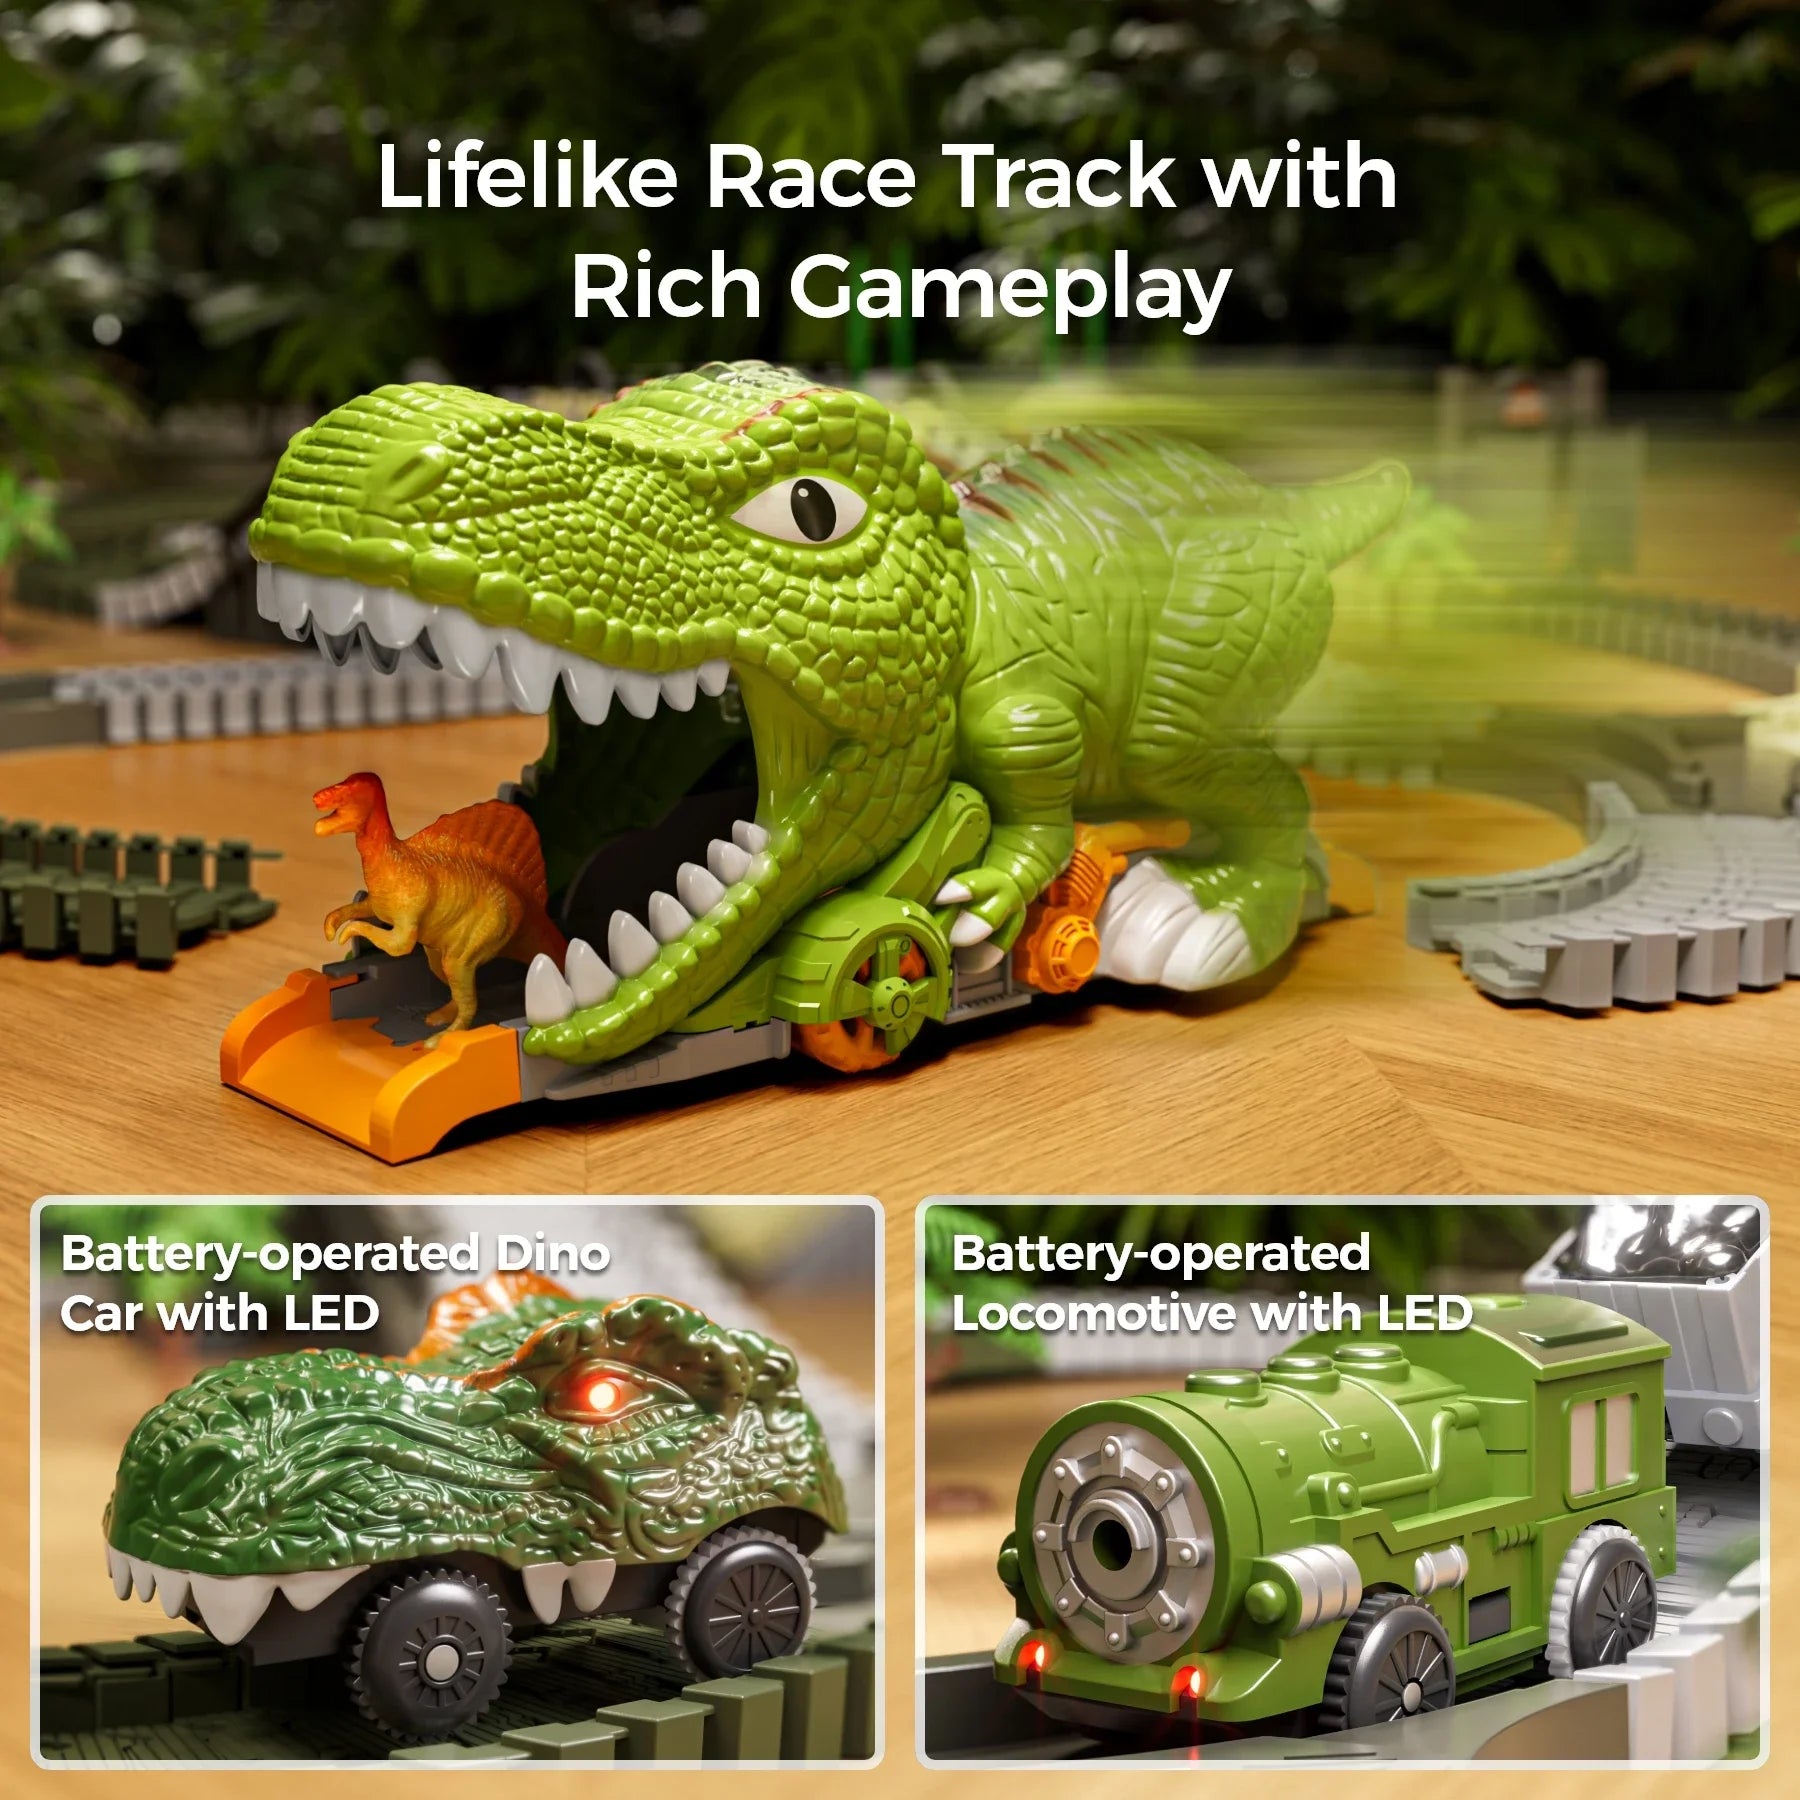 Dinosaur toys race track, 281 Pcs dinosaur train toys, flexible train tracks with dinosaurs figures, electric cars, playset for toddler kids 3 Years+